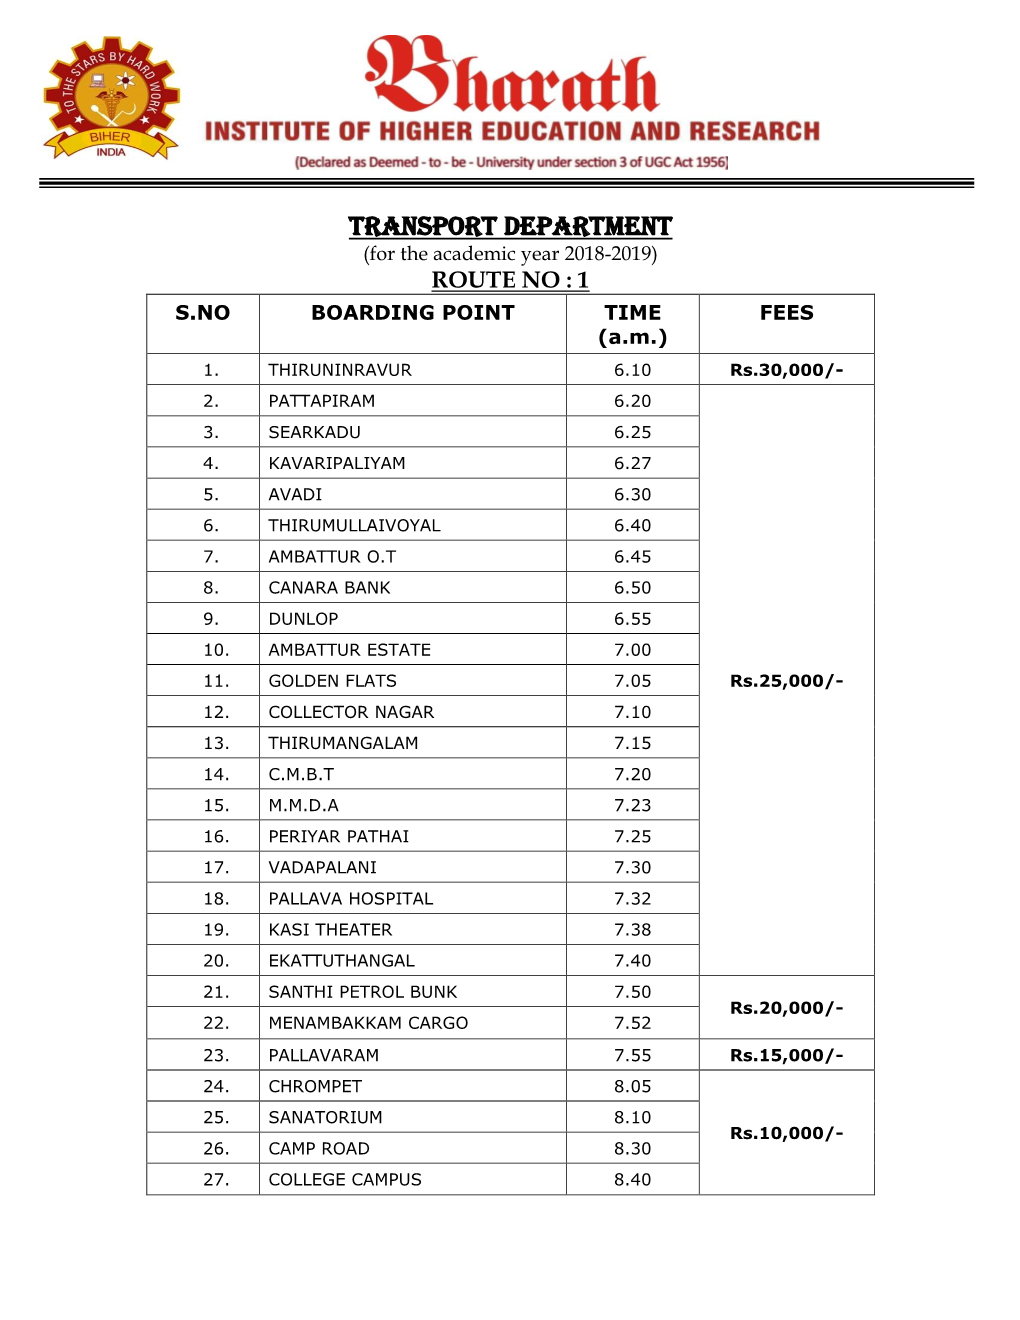 TRANSPORT DEPARTMENT (For the Academic Year 2018-2019) ROUTE NO : 1 S.NO BOARDING POINT TIME FEES (A.M.) 1